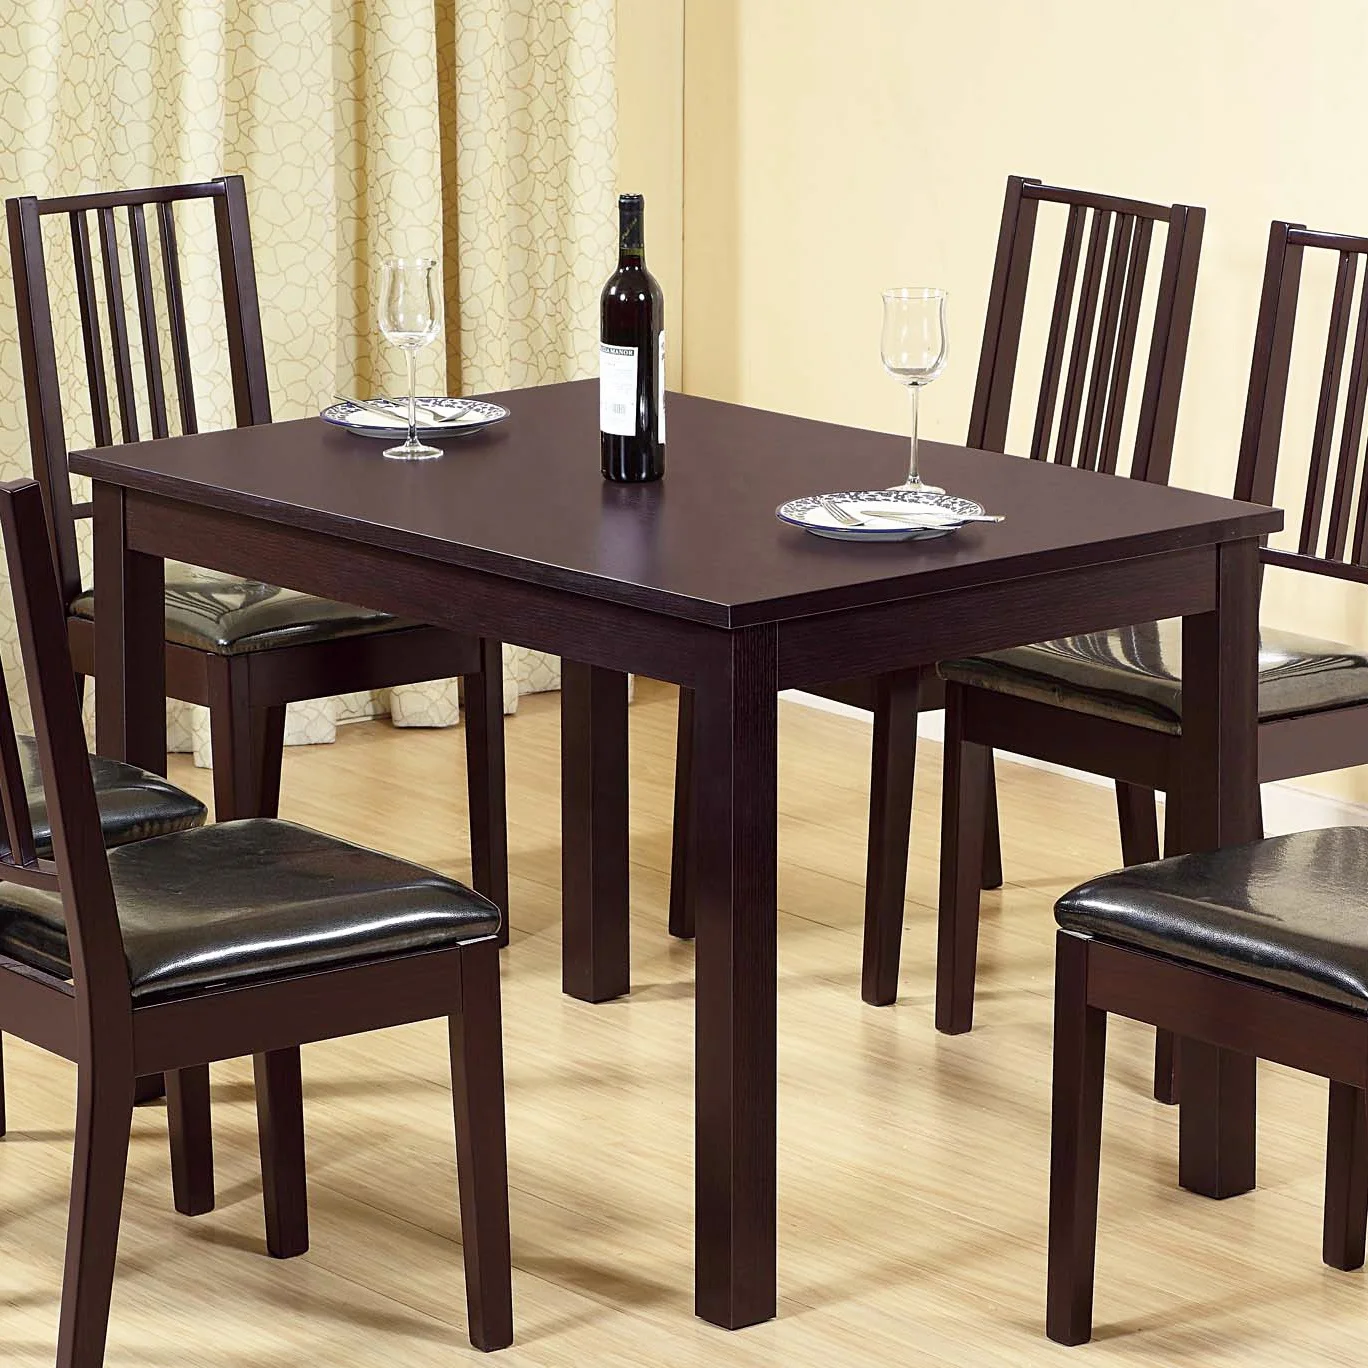 NOVA Guangdong 35-YEAR Furniture Manufacturer Dinner Room Dining Modern Dining Table Set With 4 6 8 12 Chairs